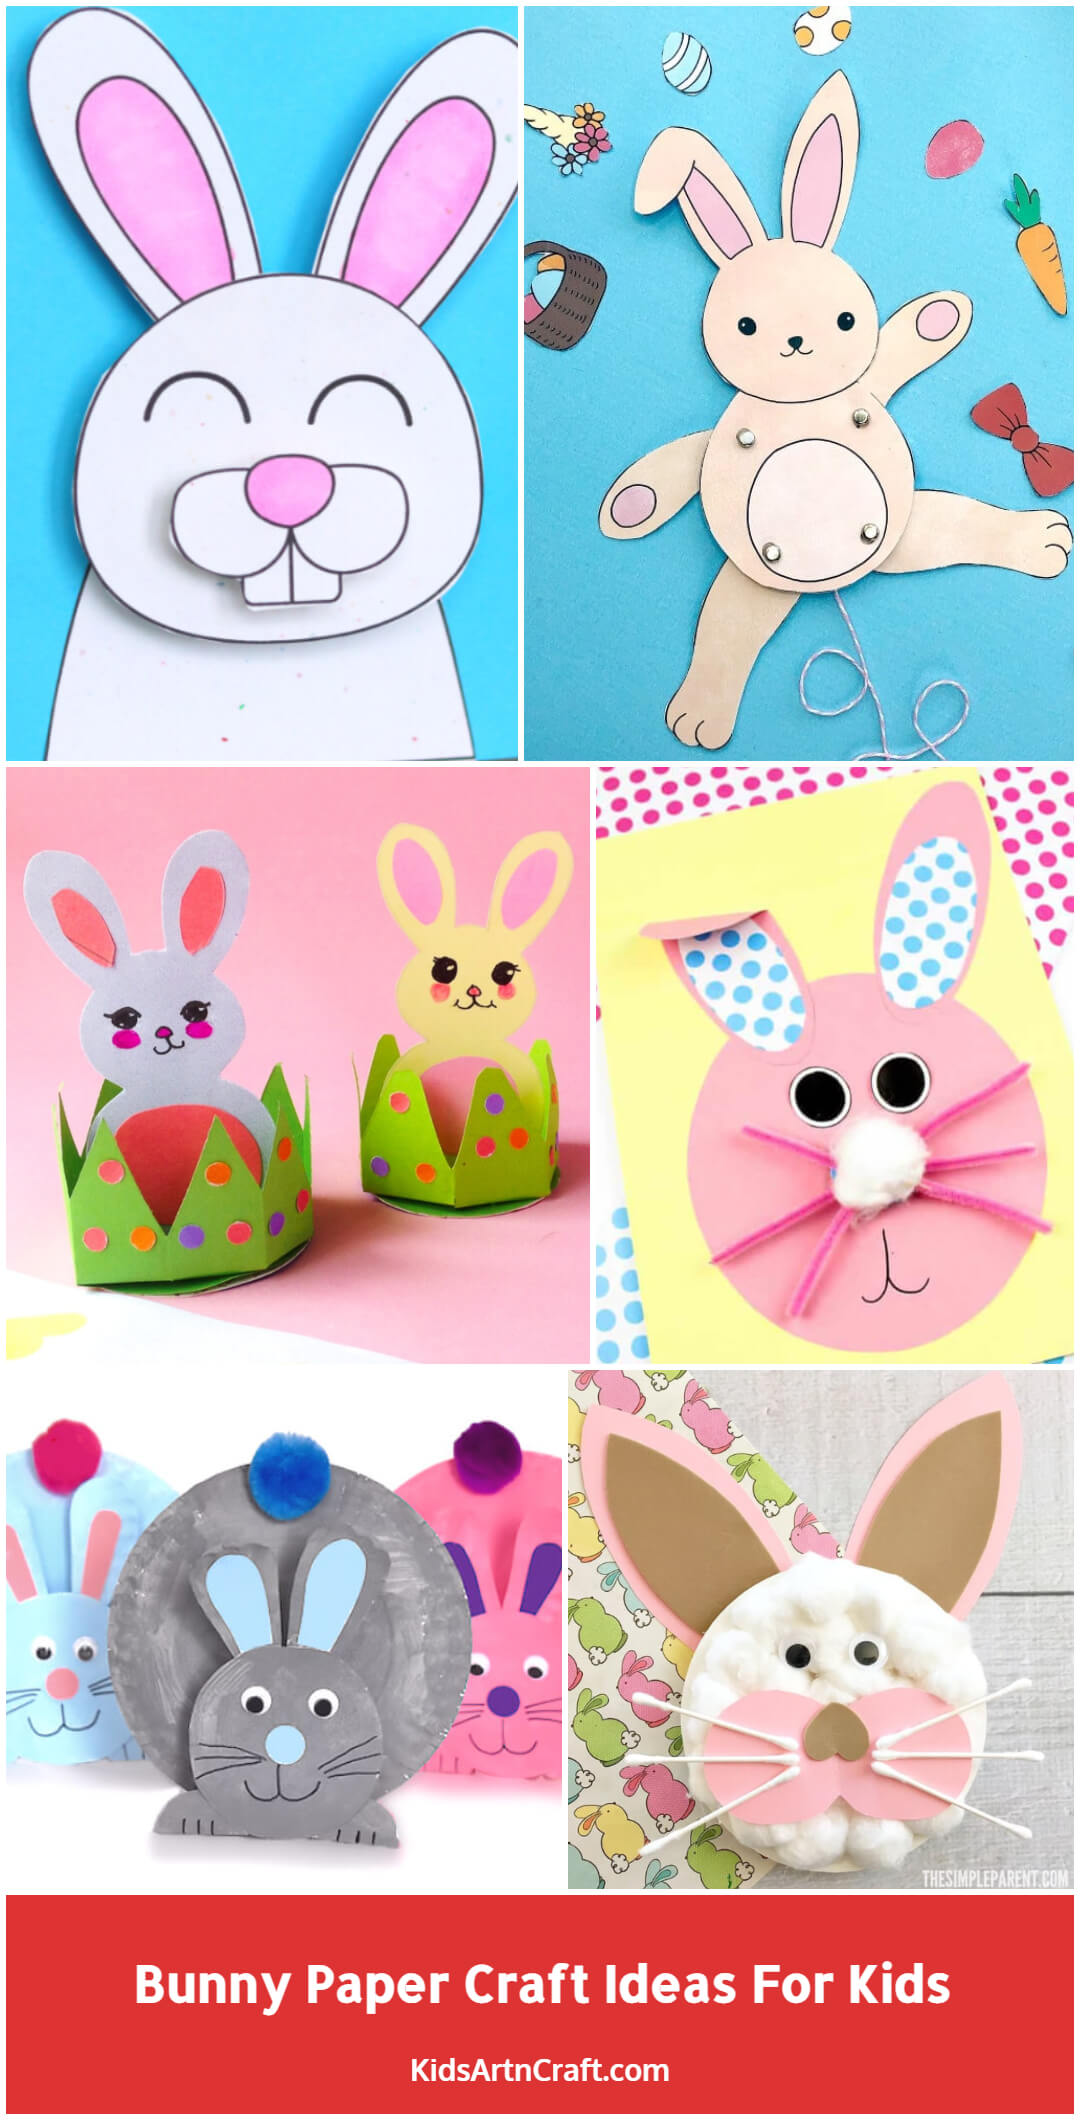 Bunny Paper Craft Ideas For Kids